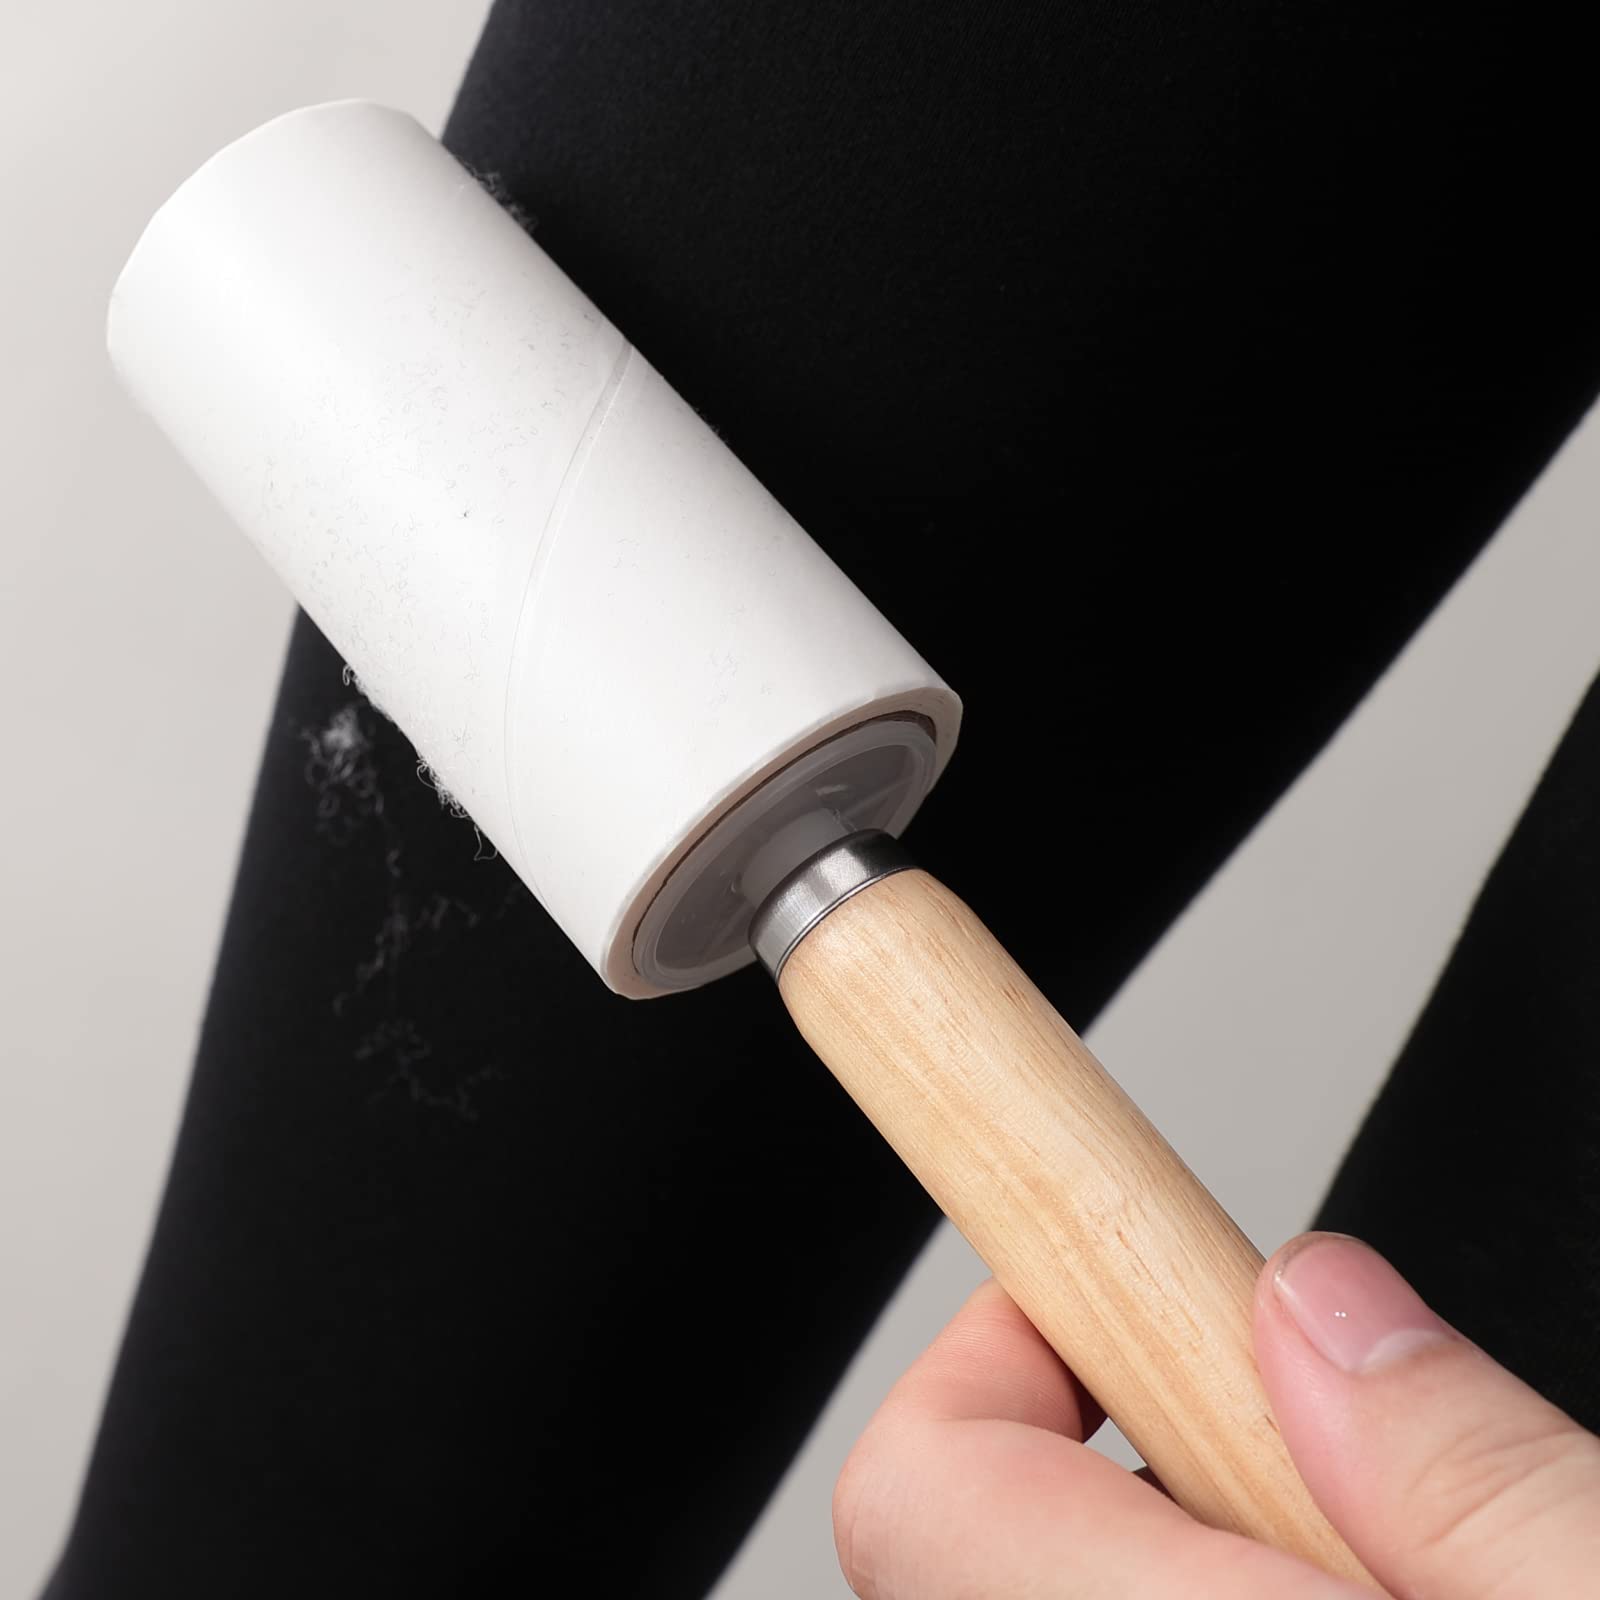 The Better Home Lint Roller for Clothes Replacement Rolls | Lint Remover for Clothes | Reusable Easy Tear Sheets | 60 Sheets Per Roll (Pack of 6)